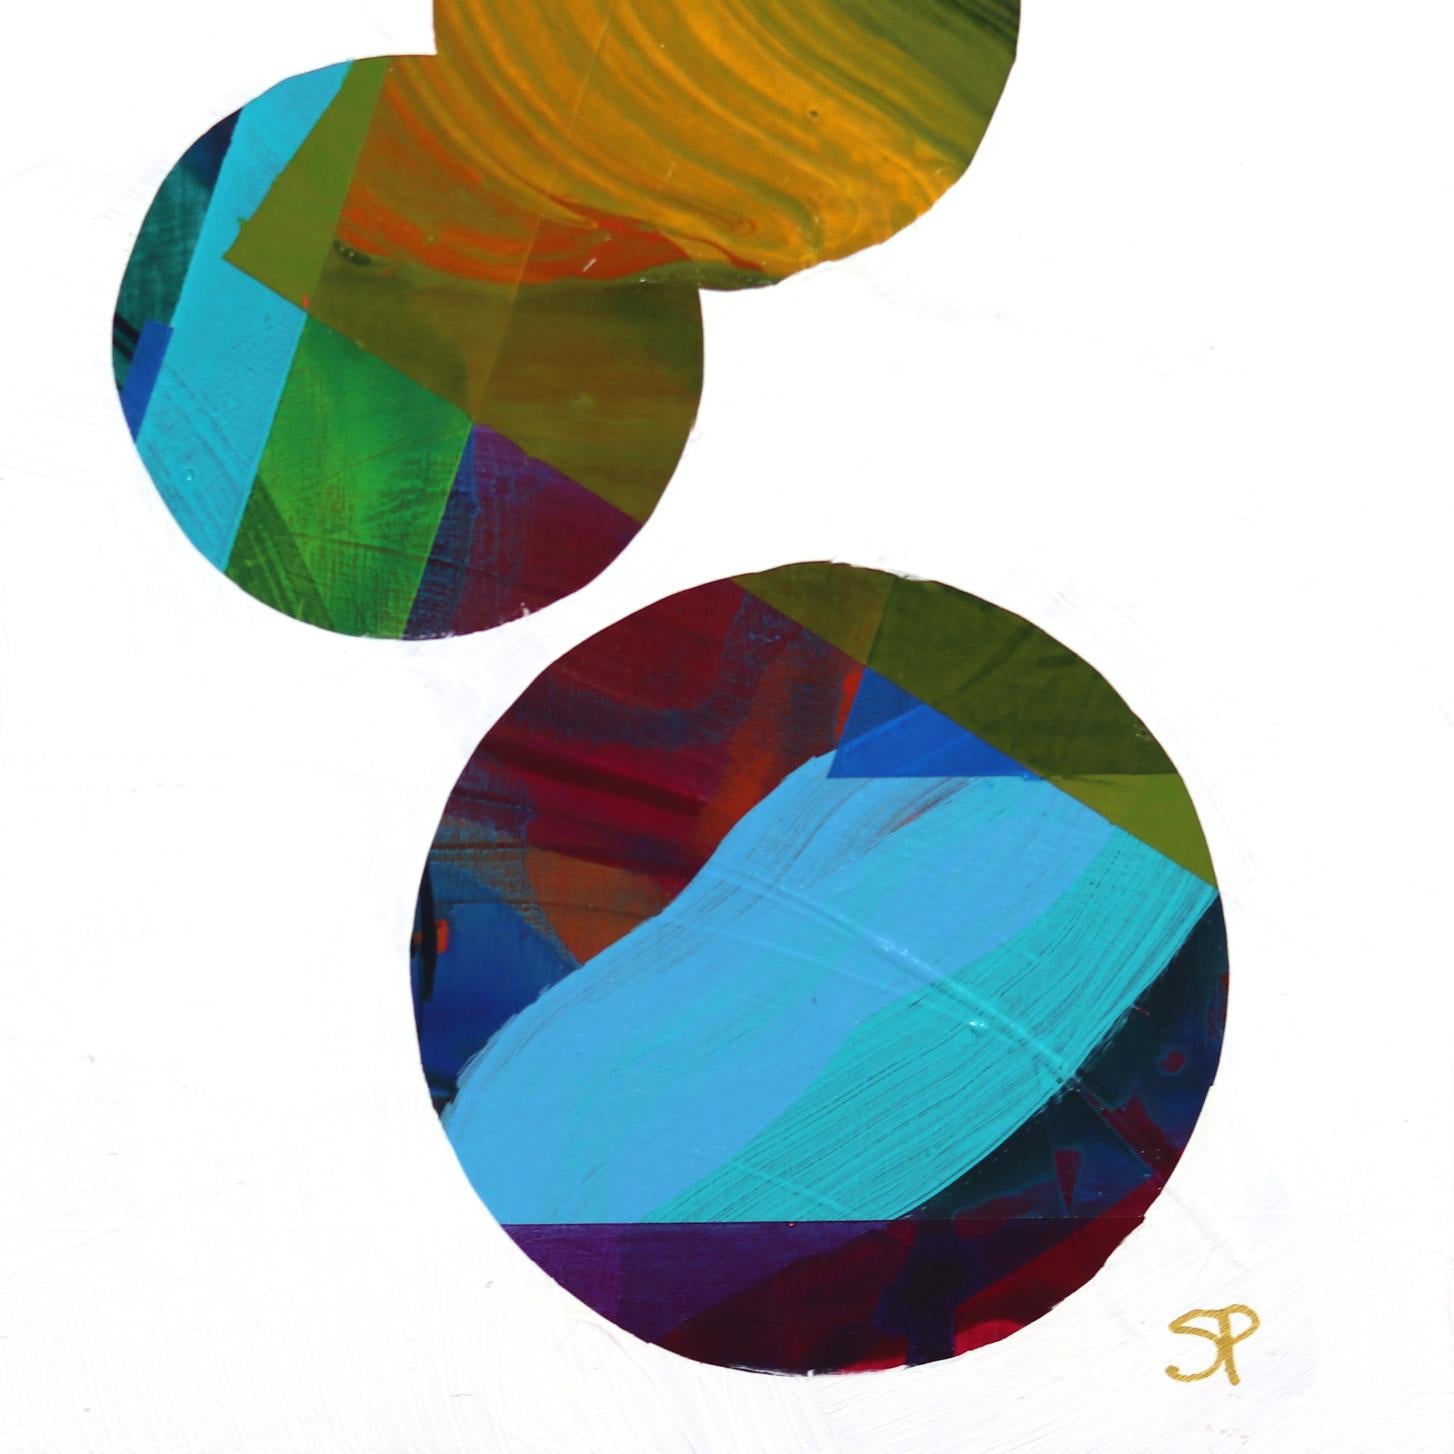 Reflections Through The Looking Glass No. 13 - Geometric Colorful Abstract Art - Black Abstract Painting by Shiri Phillips